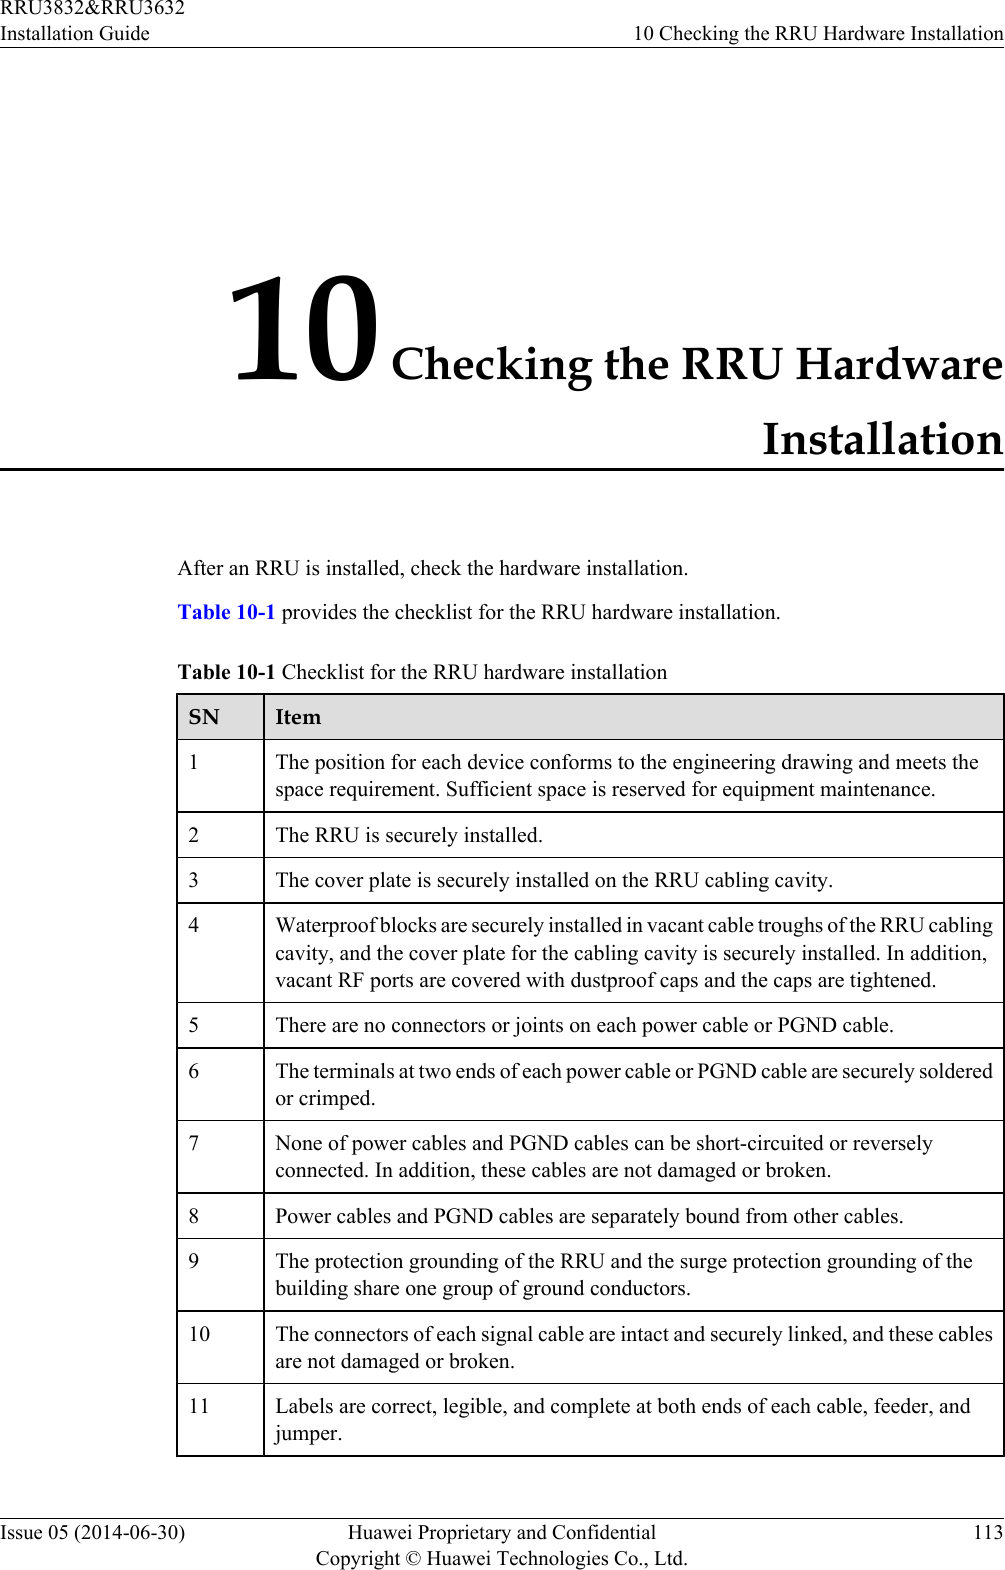 10 Checking the RRU HardwareInstallationAfter an RRU is installed, check the hardware installation.Table 10-1 provides the checklist for the RRU hardware installation.Table 10-1 Checklist for the RRU hardware installationSN Item1The position for each device conforms to the engineering drawing and meets thespace requirement. Sufficient space is reserved for equipment maintenance.2 The RRU is securely installed.3 The cover plate is securely installed on the RRU cabling cavity.4 Waterproof blocks are securely installed in vacant cable troughs of the RRU cablingcavity, and the cover plate for the cabling cavity is securely installed. In addition,vacant RF ports are covered with dustproof caps and the caps are tightened.5 There are no connectors or joints on each power cable or PGND cable.6 The terminals at two ends of each power cable or PGND cable are securely solderedor crimped.7 None of power cables and PGND cables can be short-circuited or reverselyconnected. In addition, these cables are not damaged or broken.8 Power cables and PGND cables are separately bound from other cables.9 The protection grounding of the RRU and the surge protection grounding of thebuilding share one group of ground conductors.10 The connectors of each signal cable are intact and securely linked, and these cablesare not damaged or broken.11 Labels are correct, legible, and complete at both ends of each cable, feeder, andjumper.RRU3832&amp;RRU3632Installation Guide 10 Checking the RRU Hardware InstallationIssue 05 (2014-06-30) Huawei Proprietary and ConfidentialCopyright © Huawei Technologies Co., Ltd.113